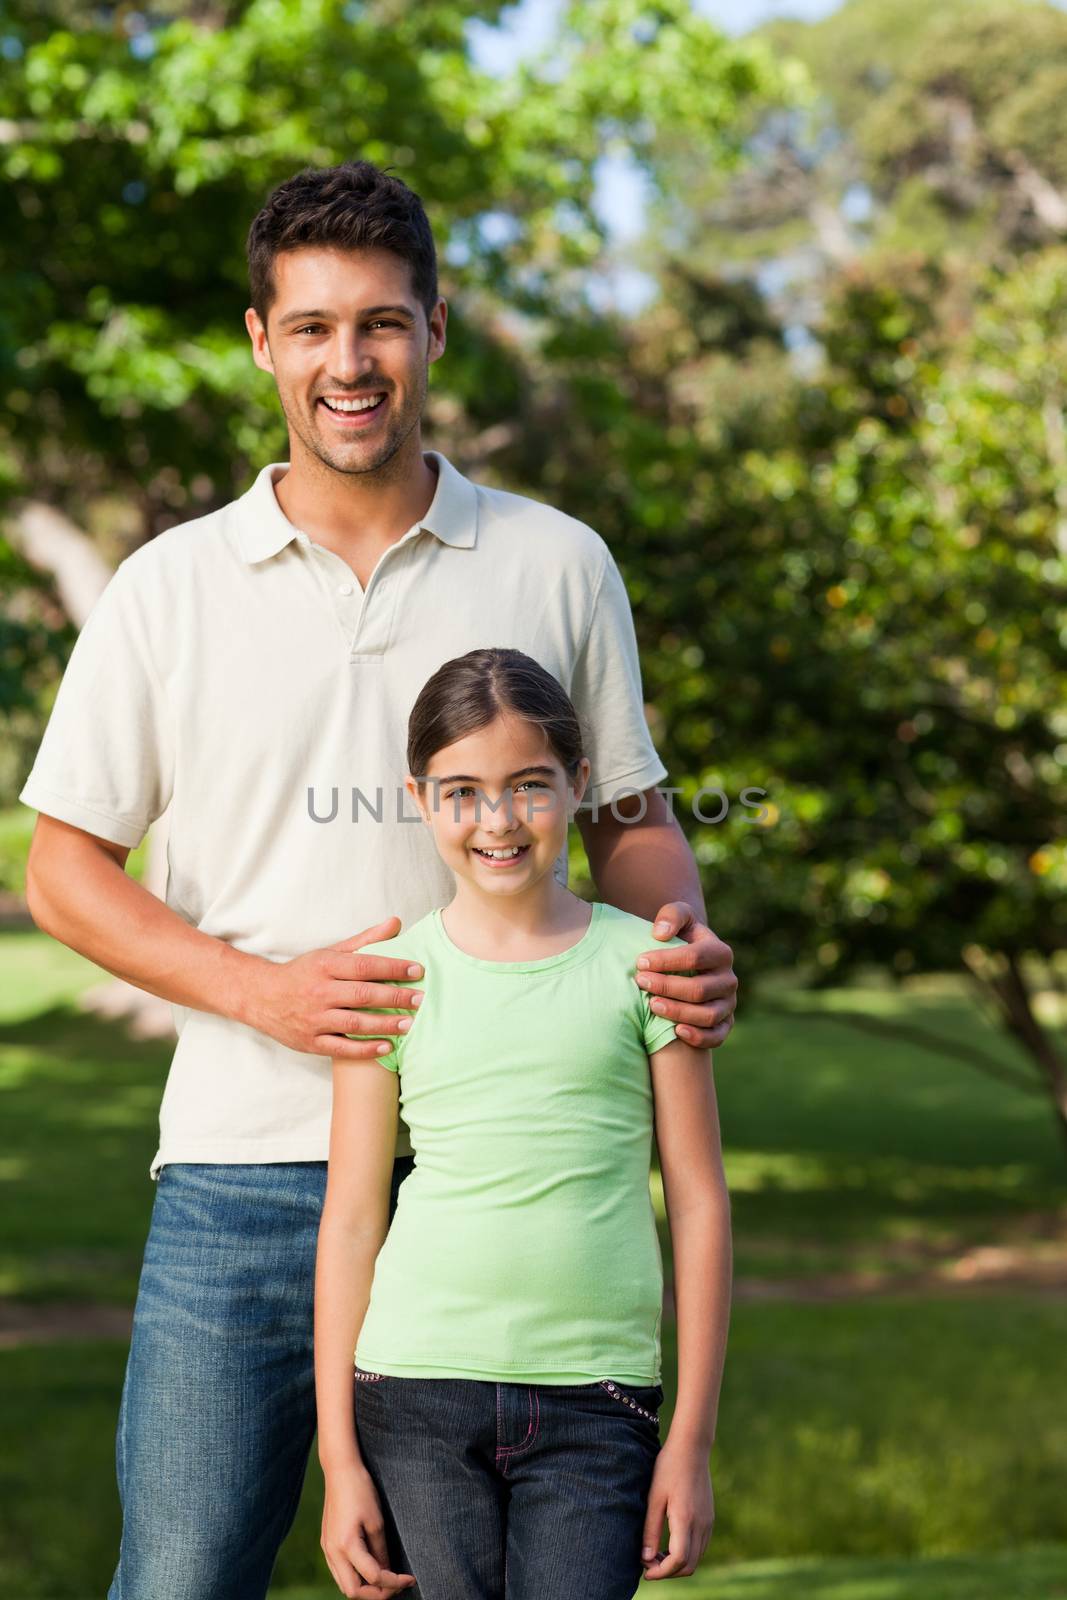 Daughter with her father in the park during the summer